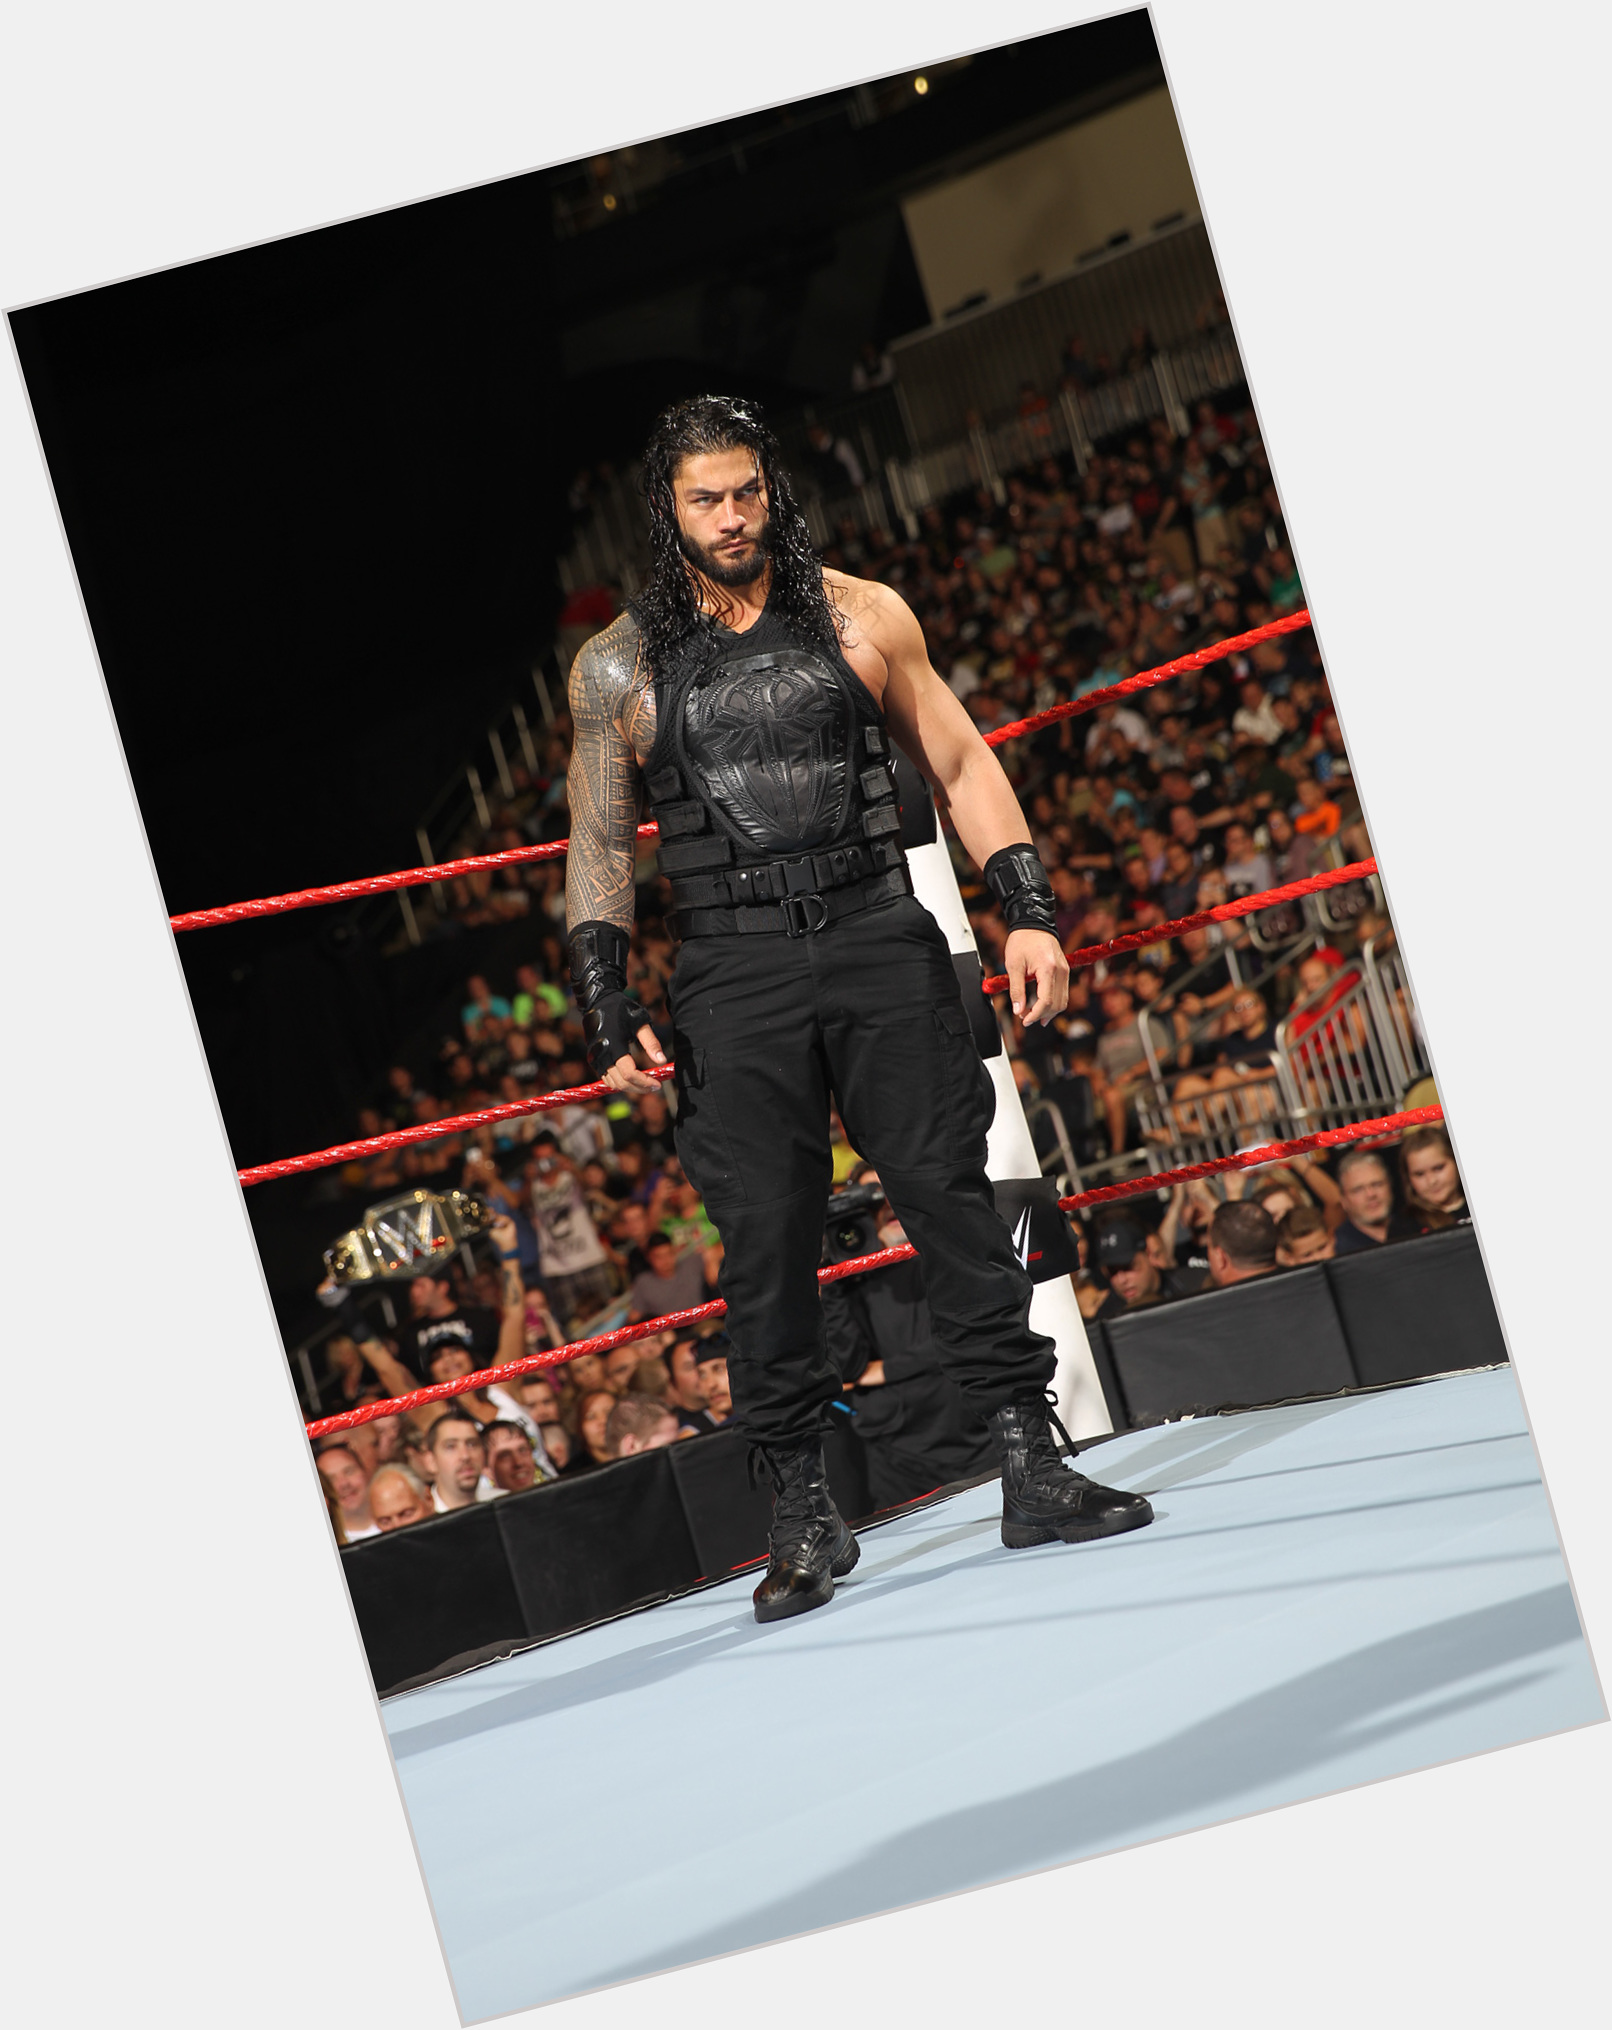 Roman Reigns exclusive hot pic 3